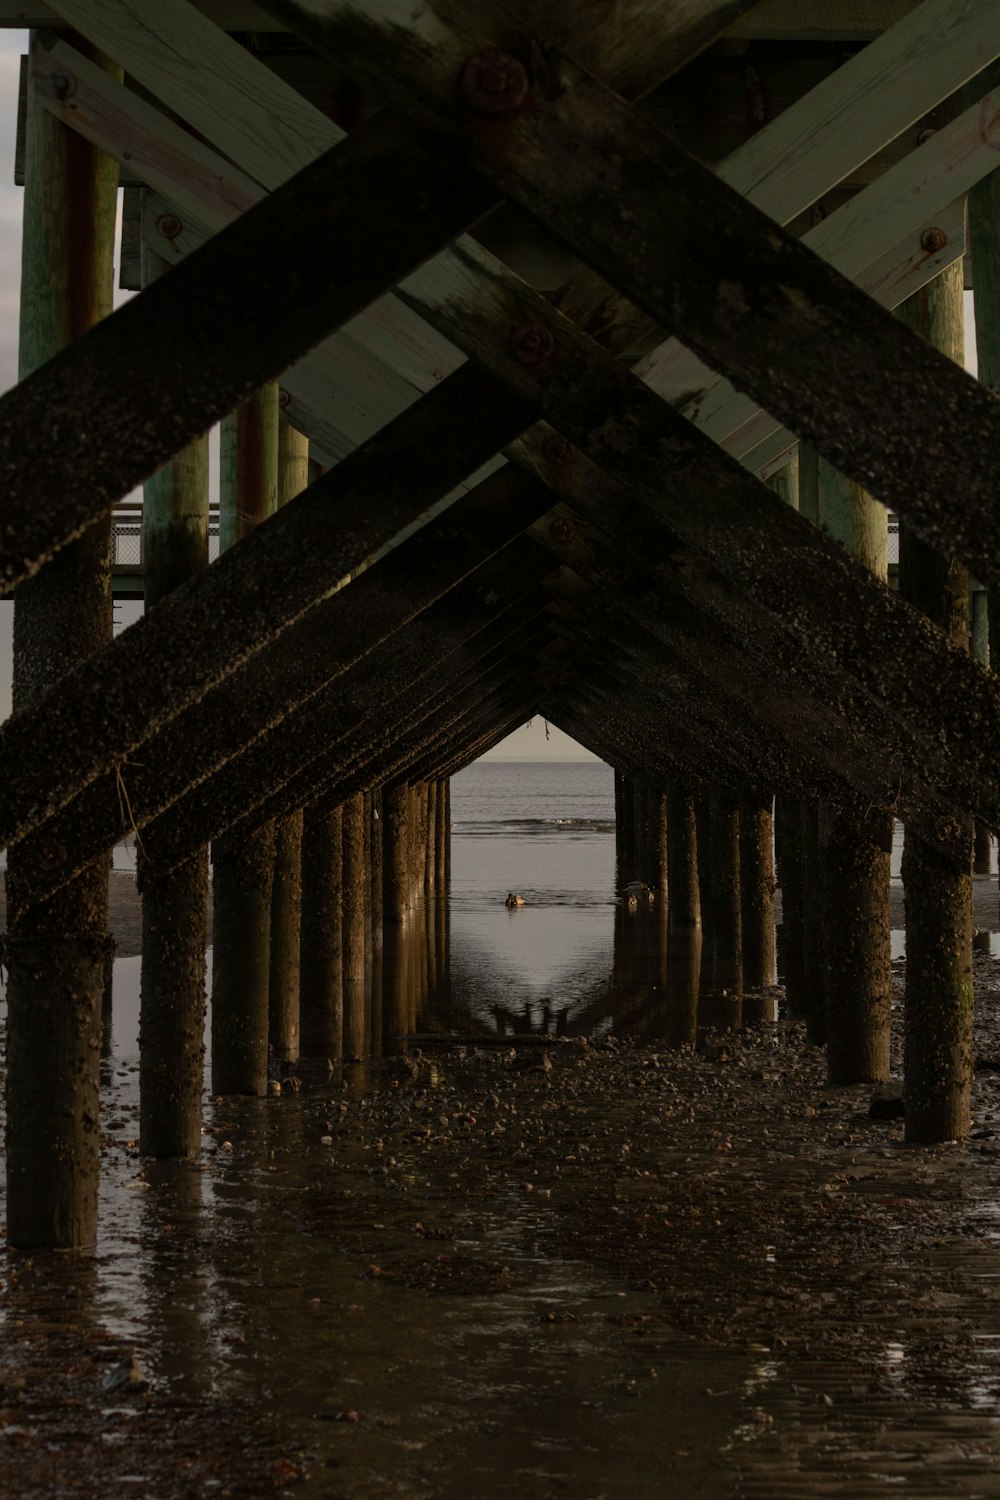 a view of a pier from under the water